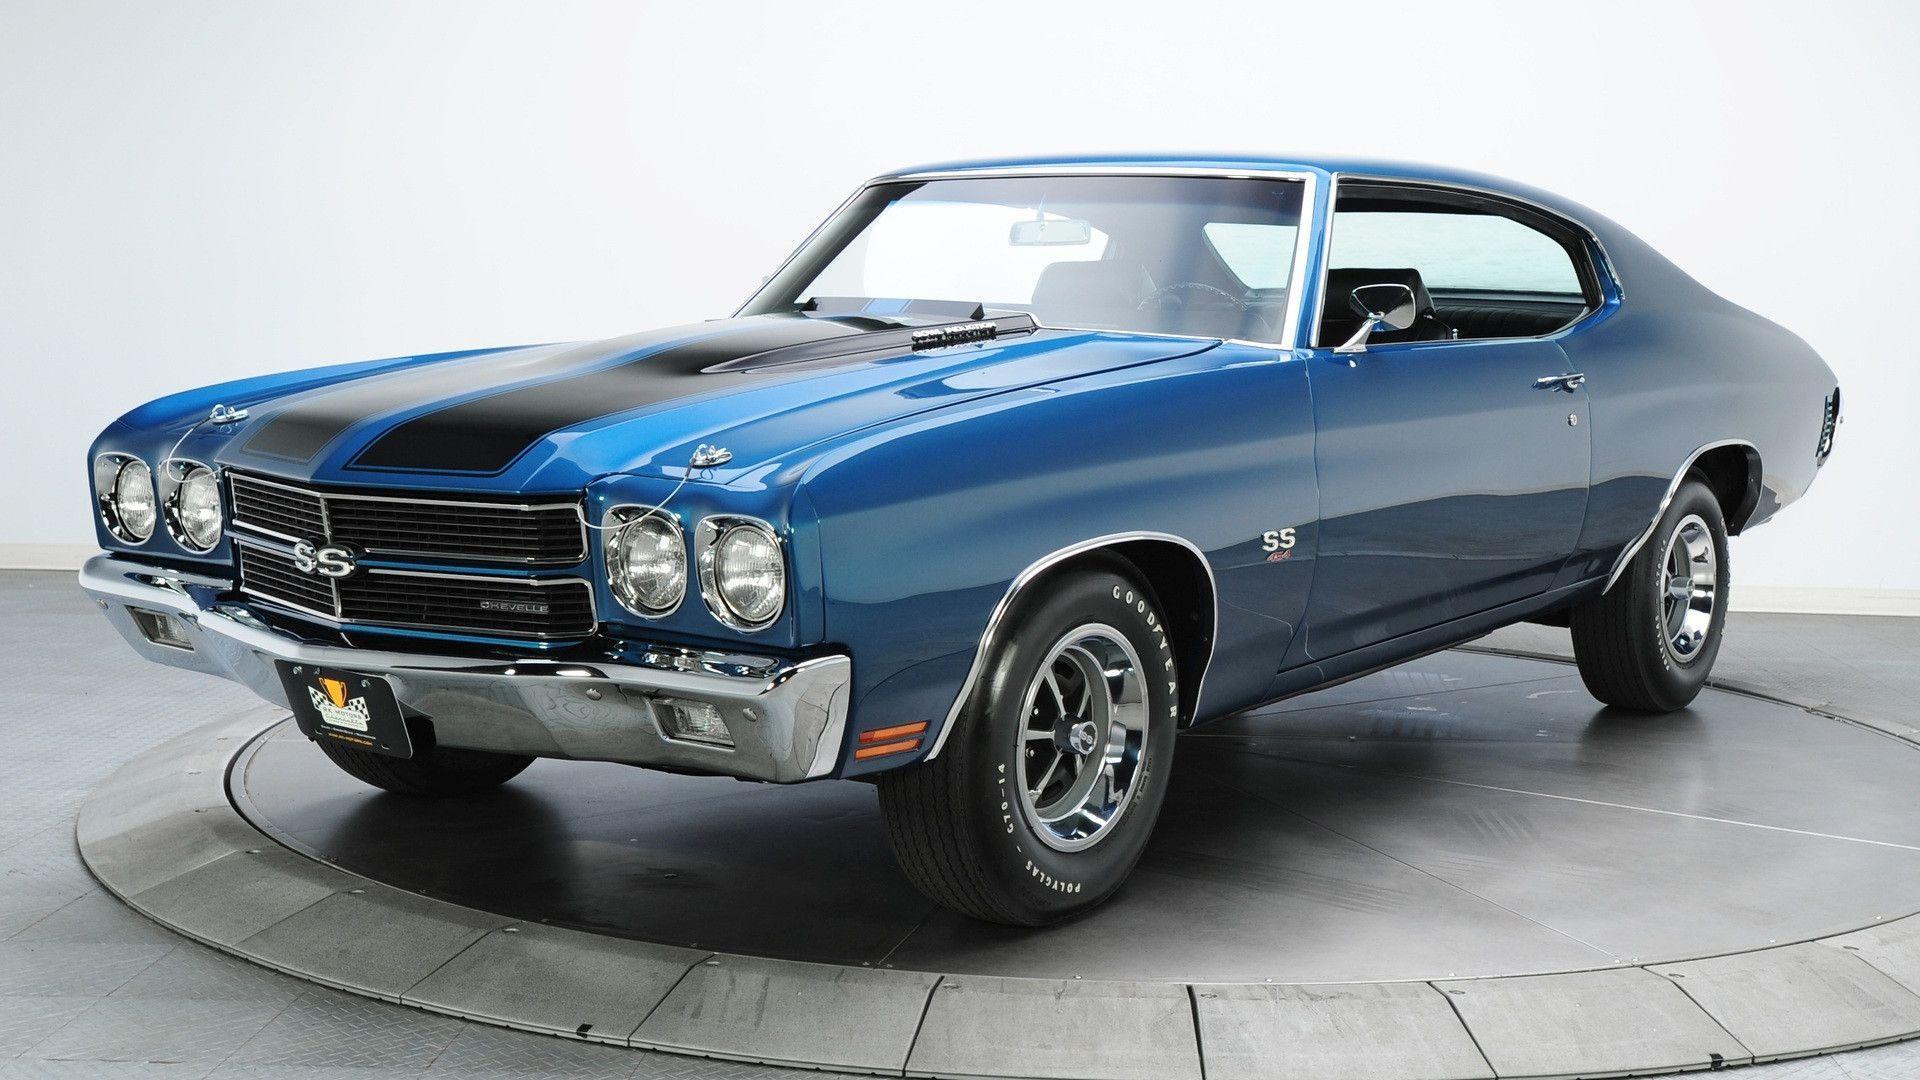 Chevelle SS Wallpapers Wallpaper Cave